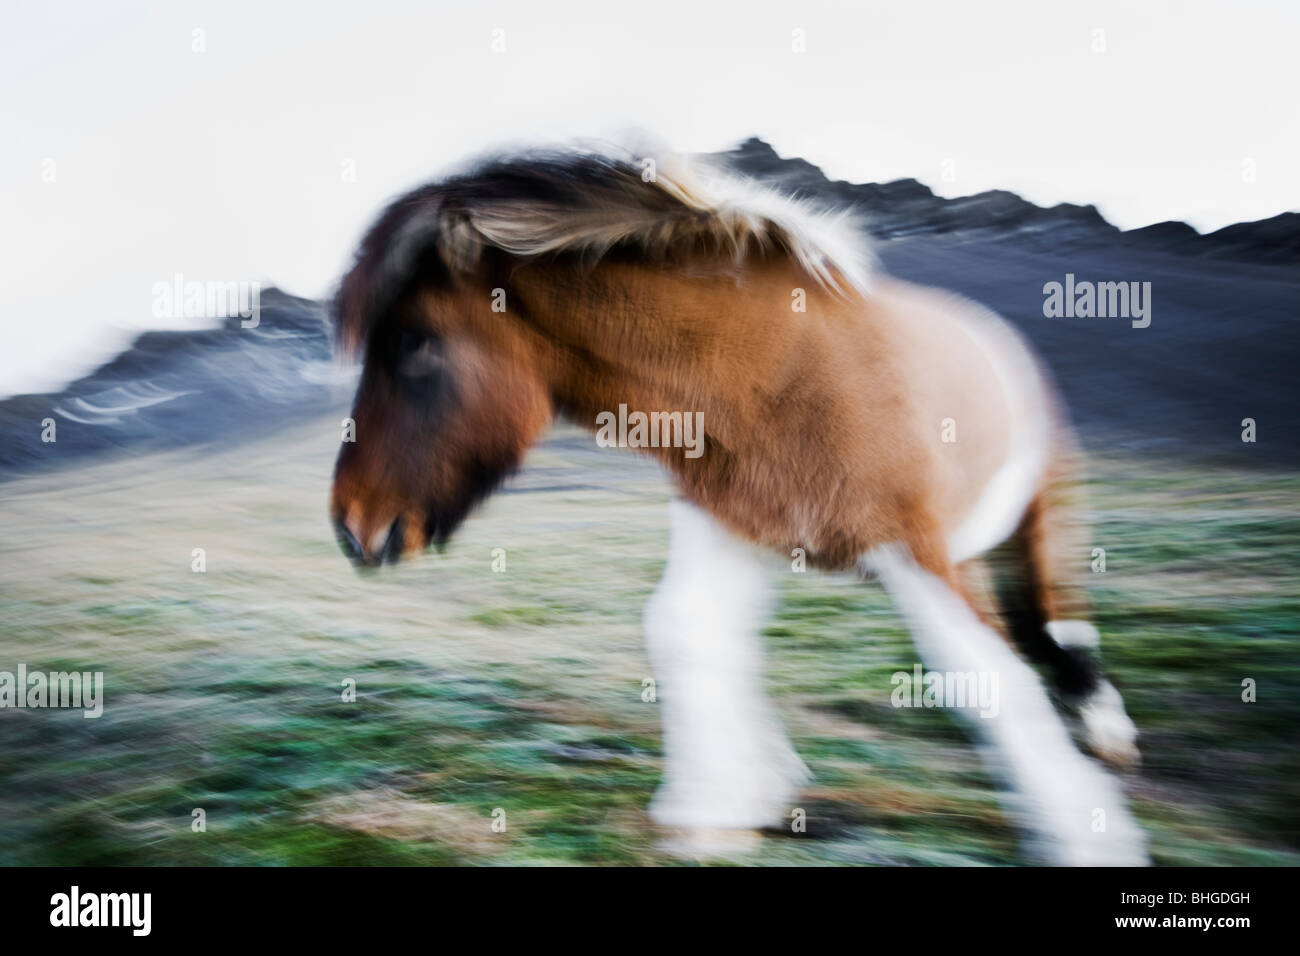 An Icelandic horse in movement, Iceland. Stock Photo